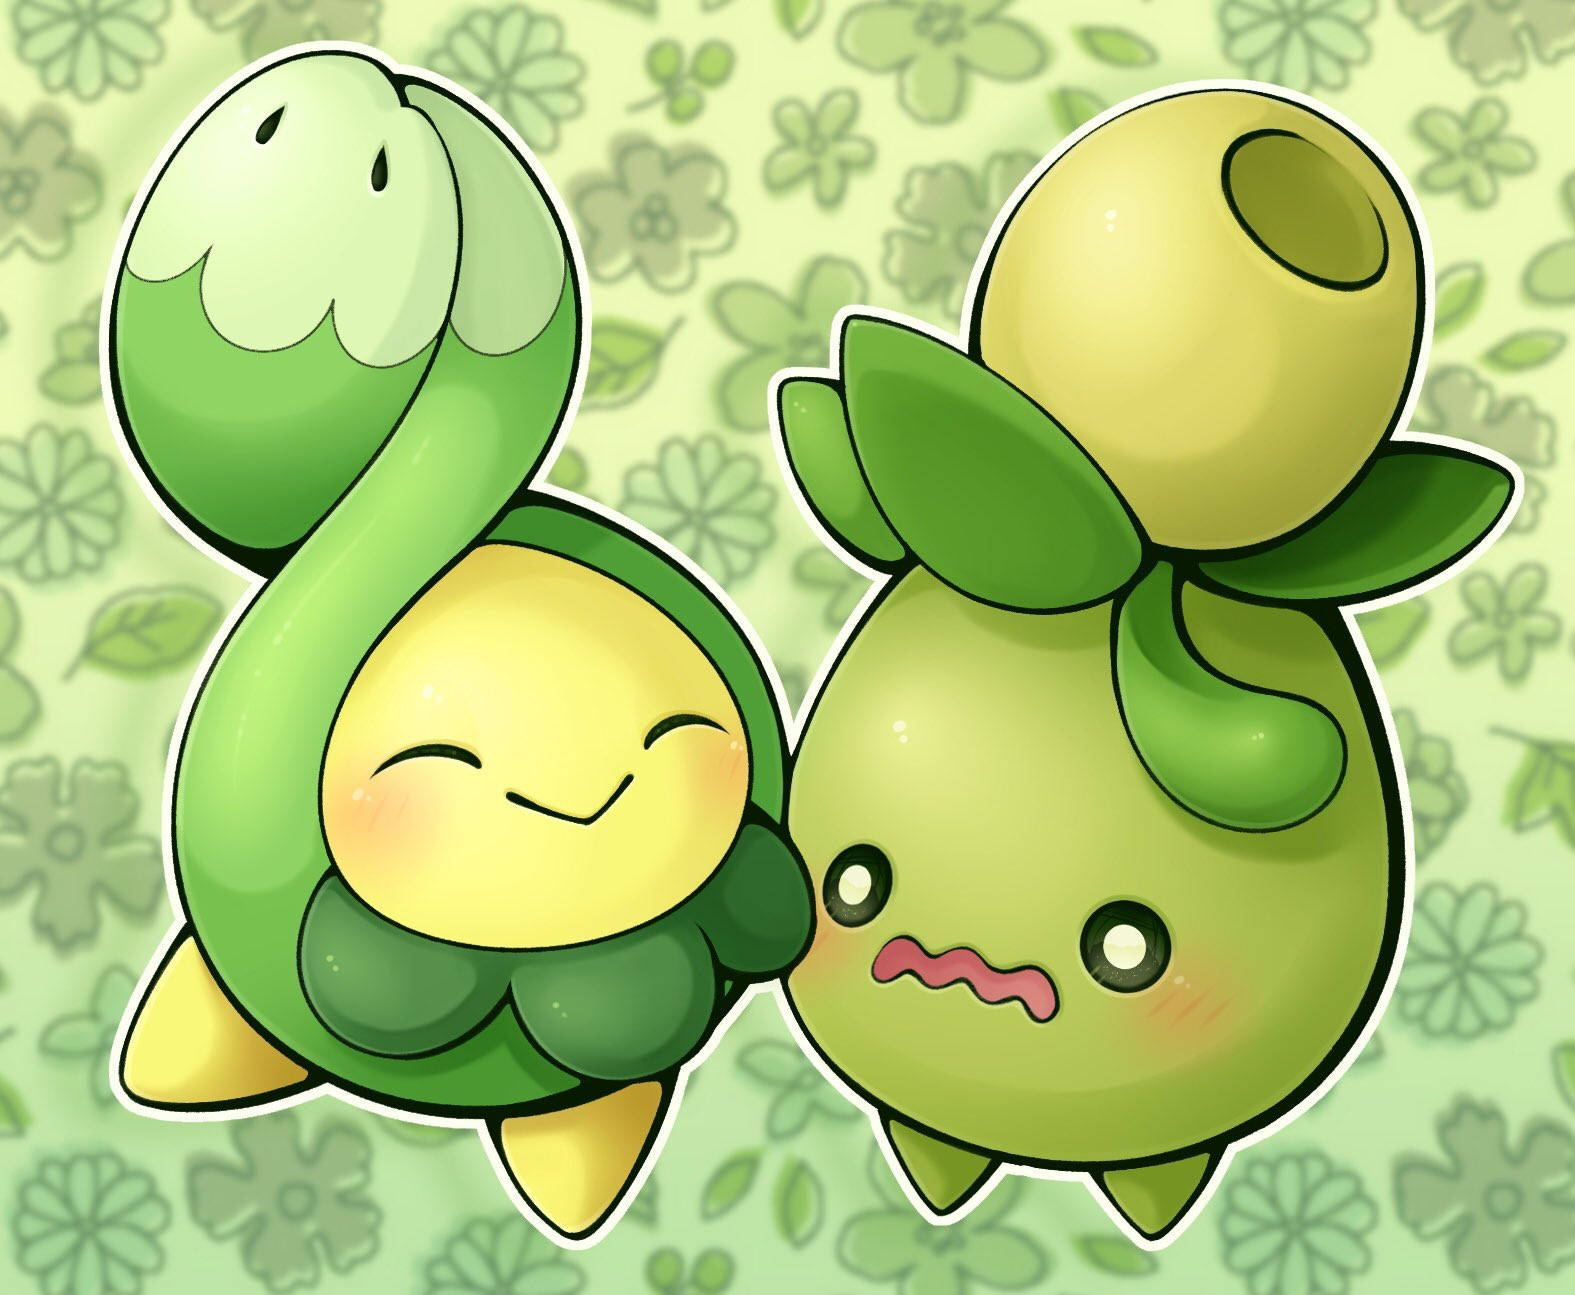 Budew With Smoliv Against Floral-Patterned Background Wallpaper